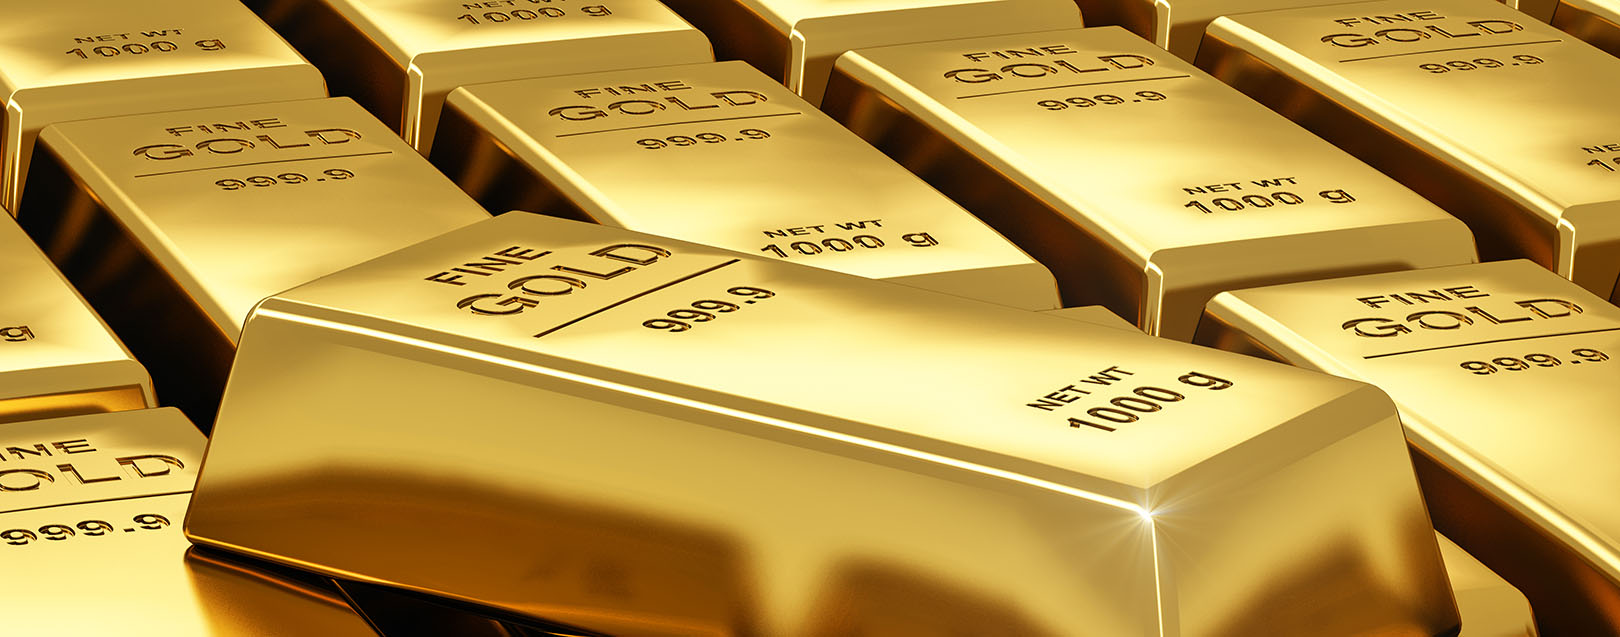 Global gold demand up 15% in Q2 2016: Report